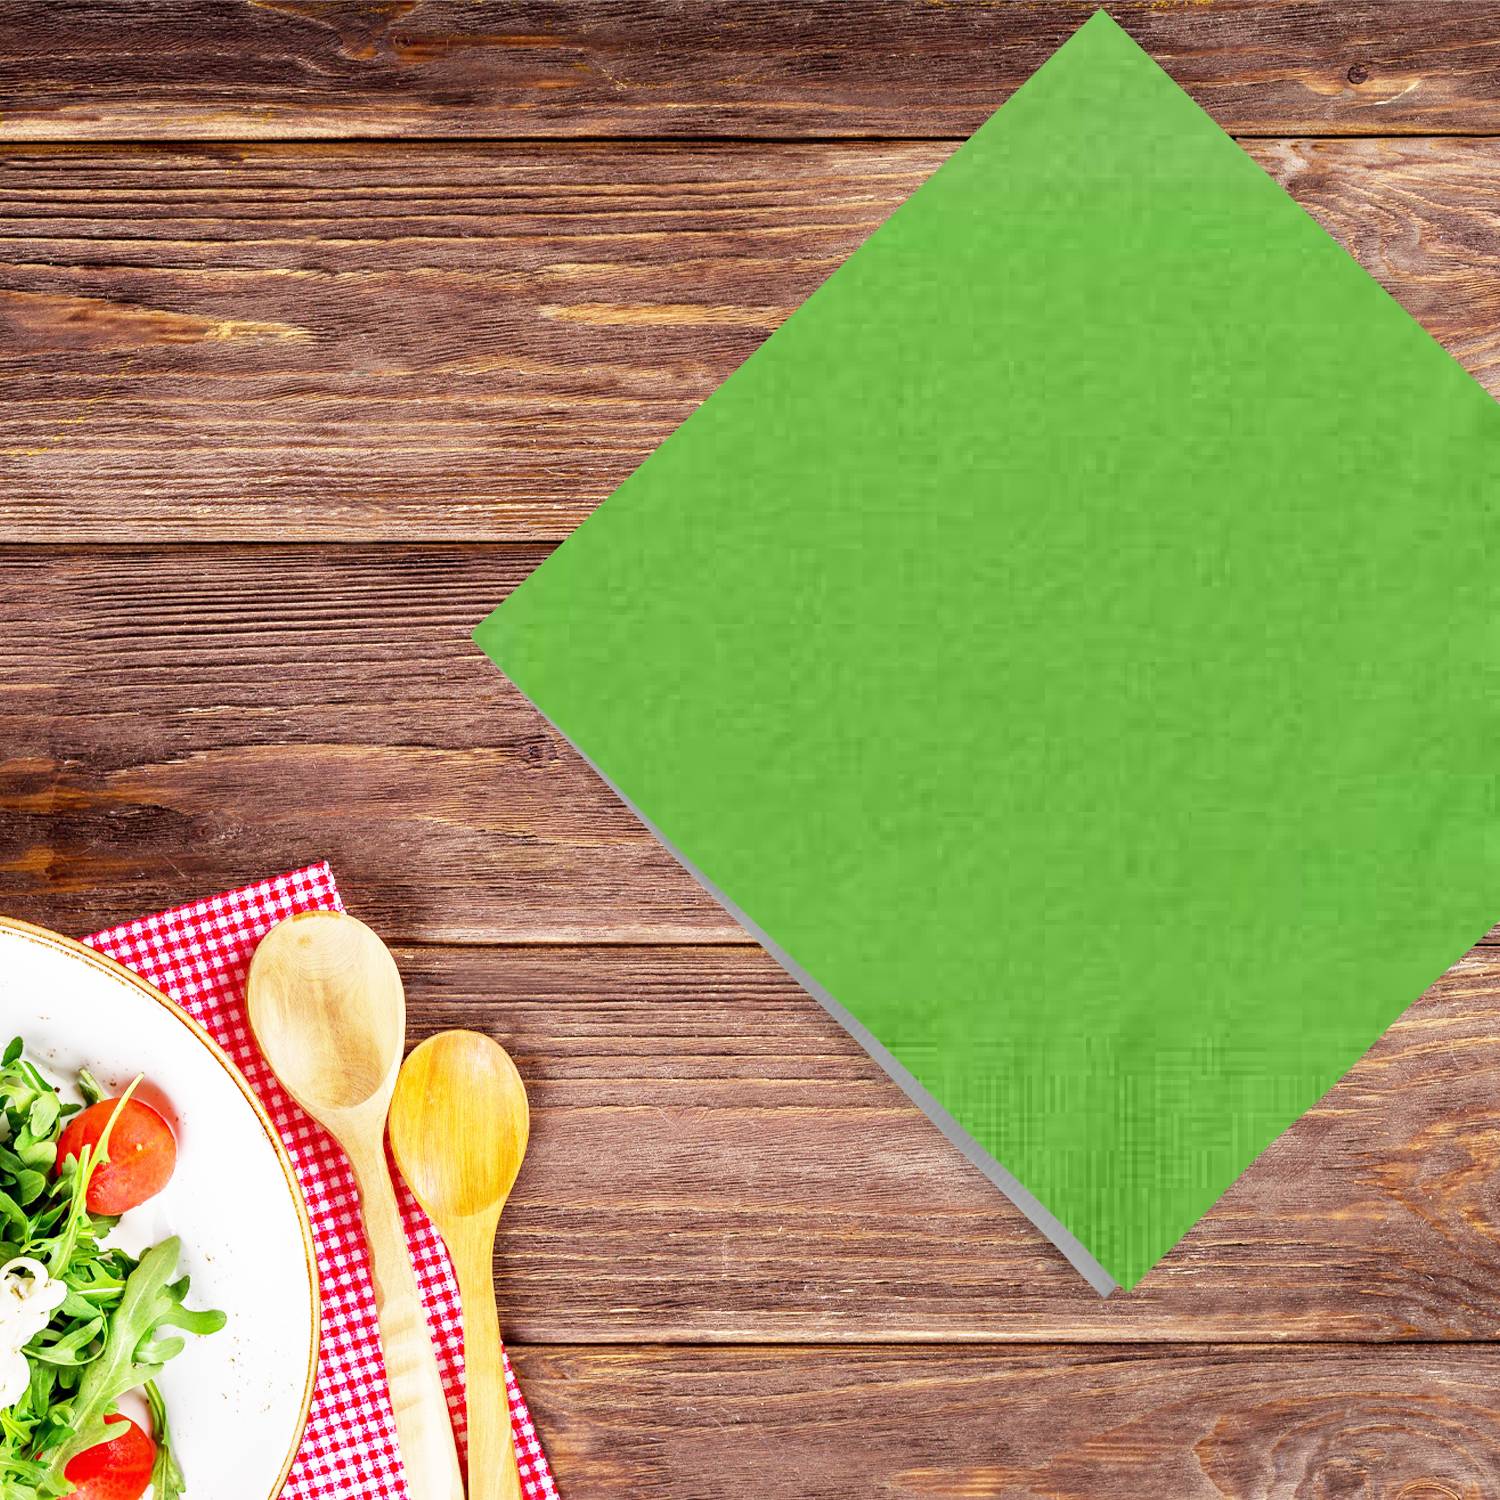 SALE Lime Green Lunch Napkins 20 count  Party Dimensions   